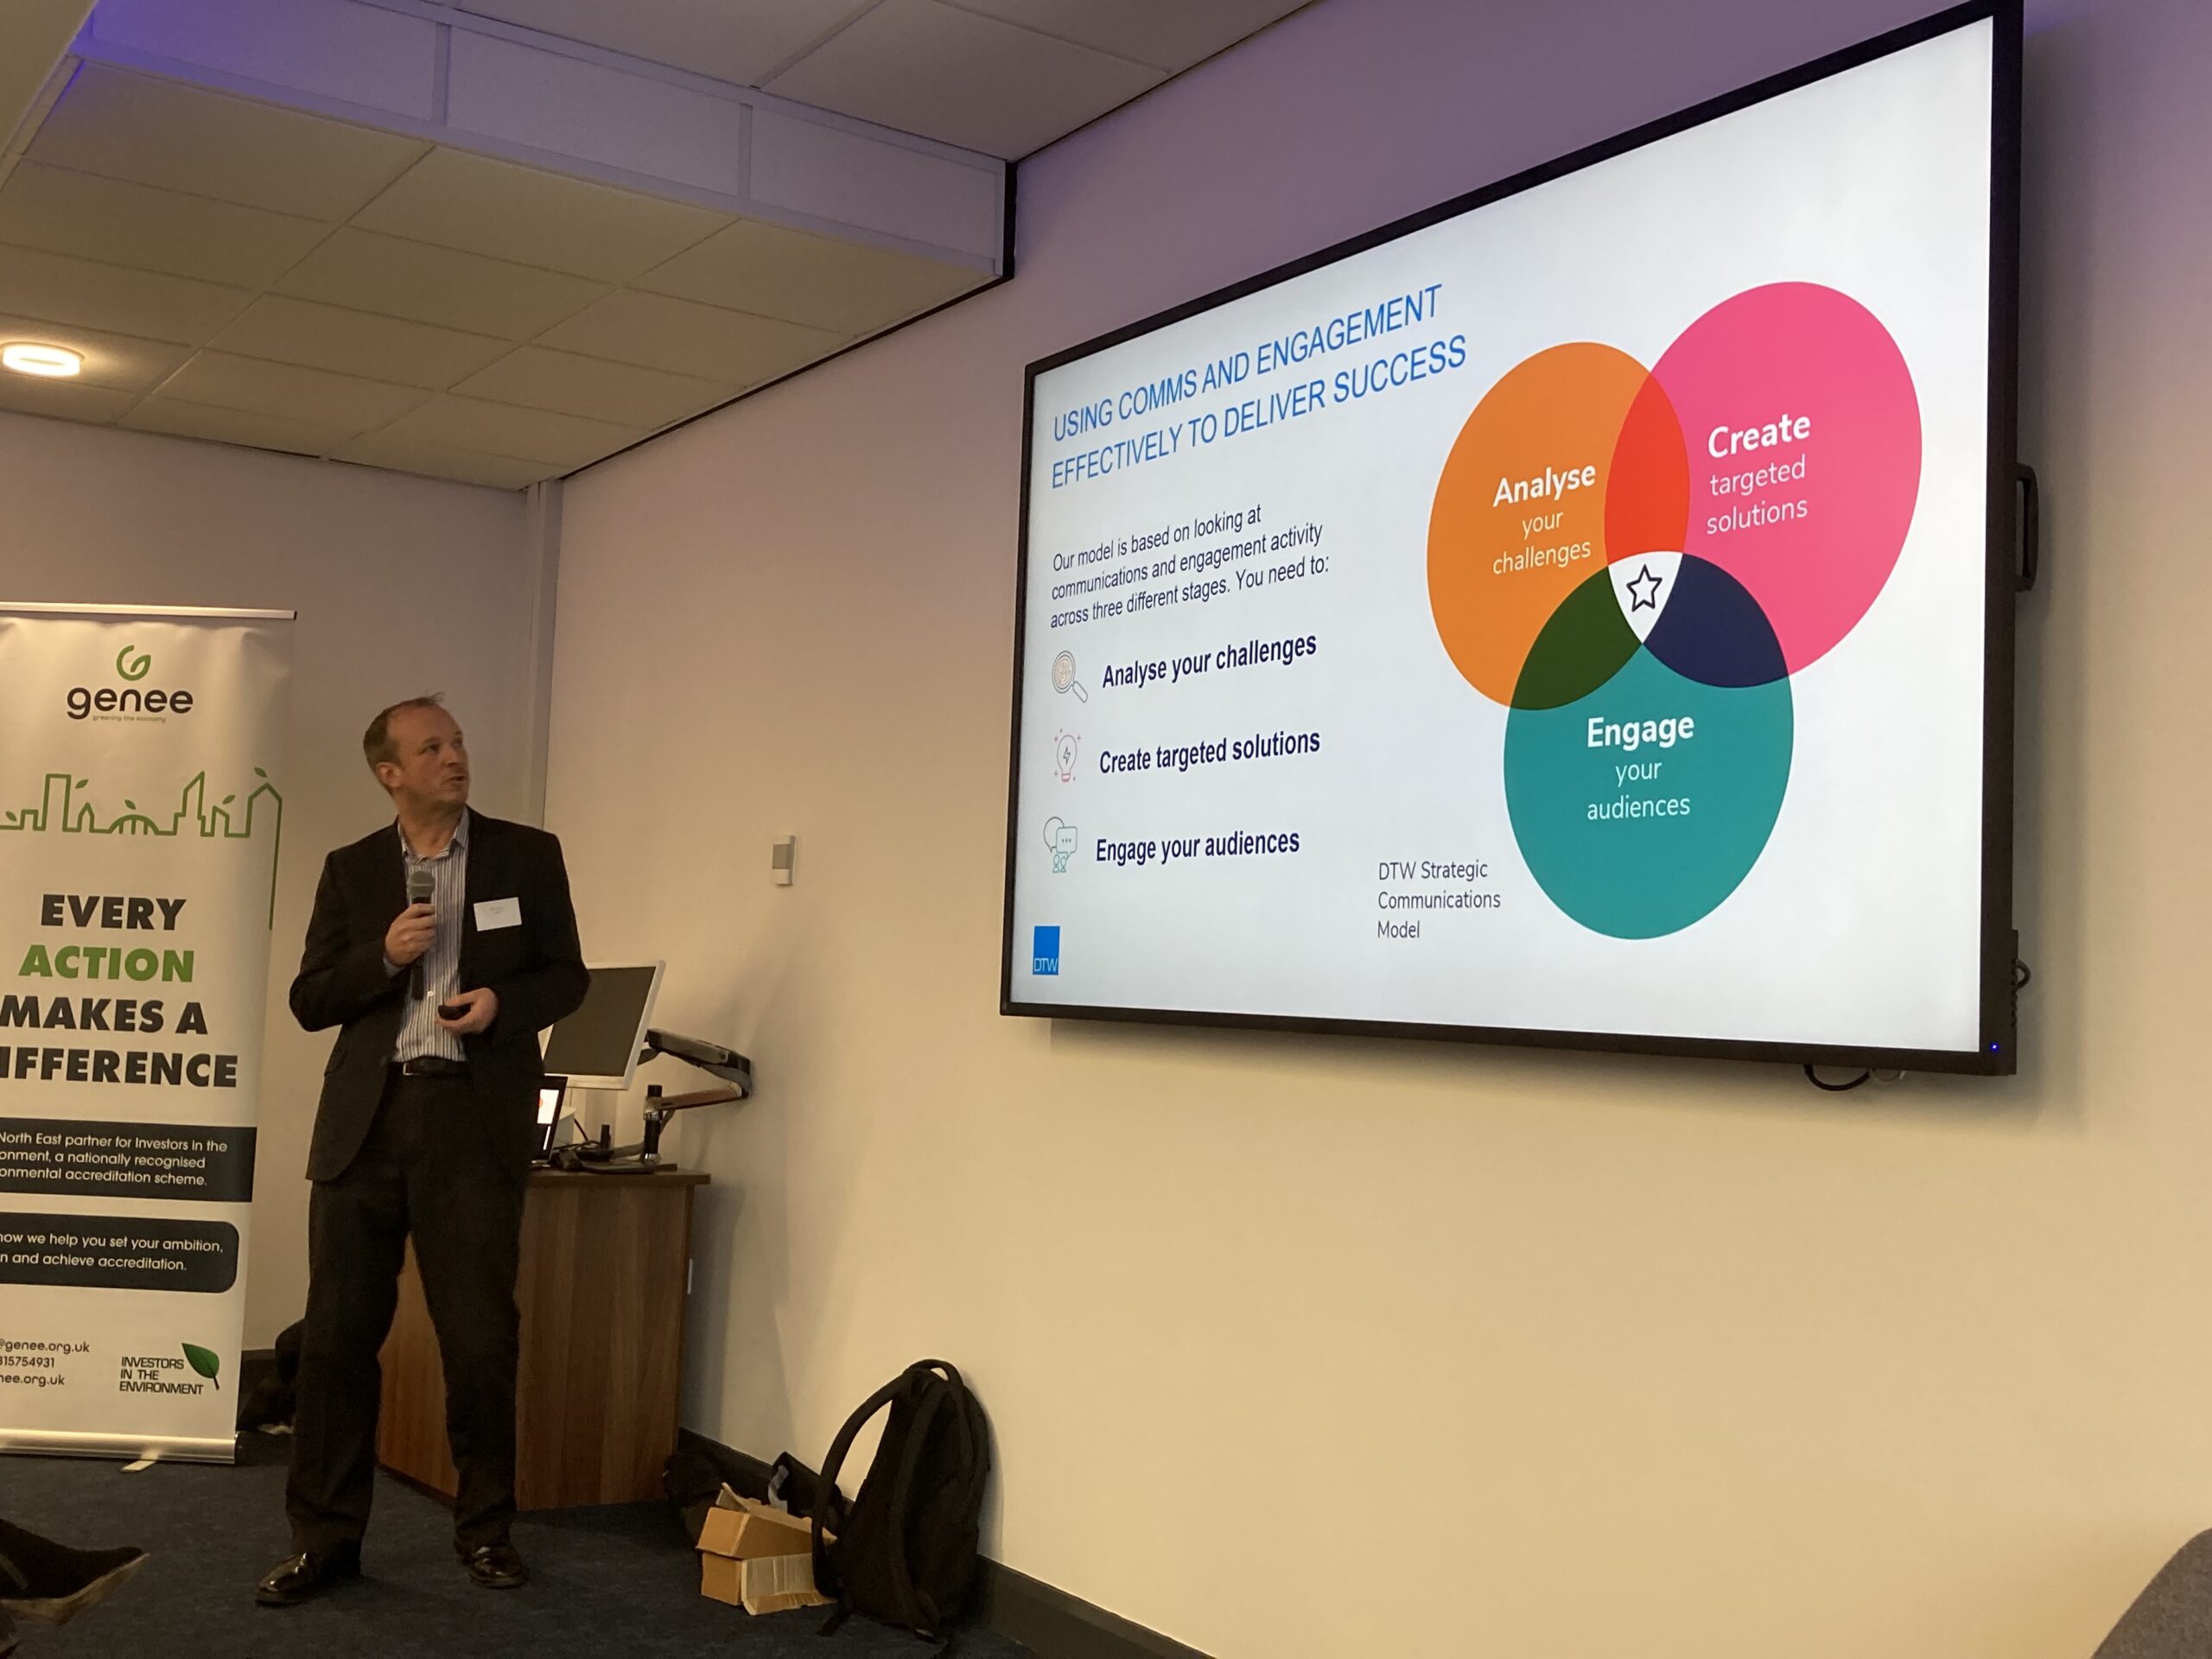 DTW Managing Director, Chris Taylor stood in front of a large screen with an image of the DTW strategic communications model on it